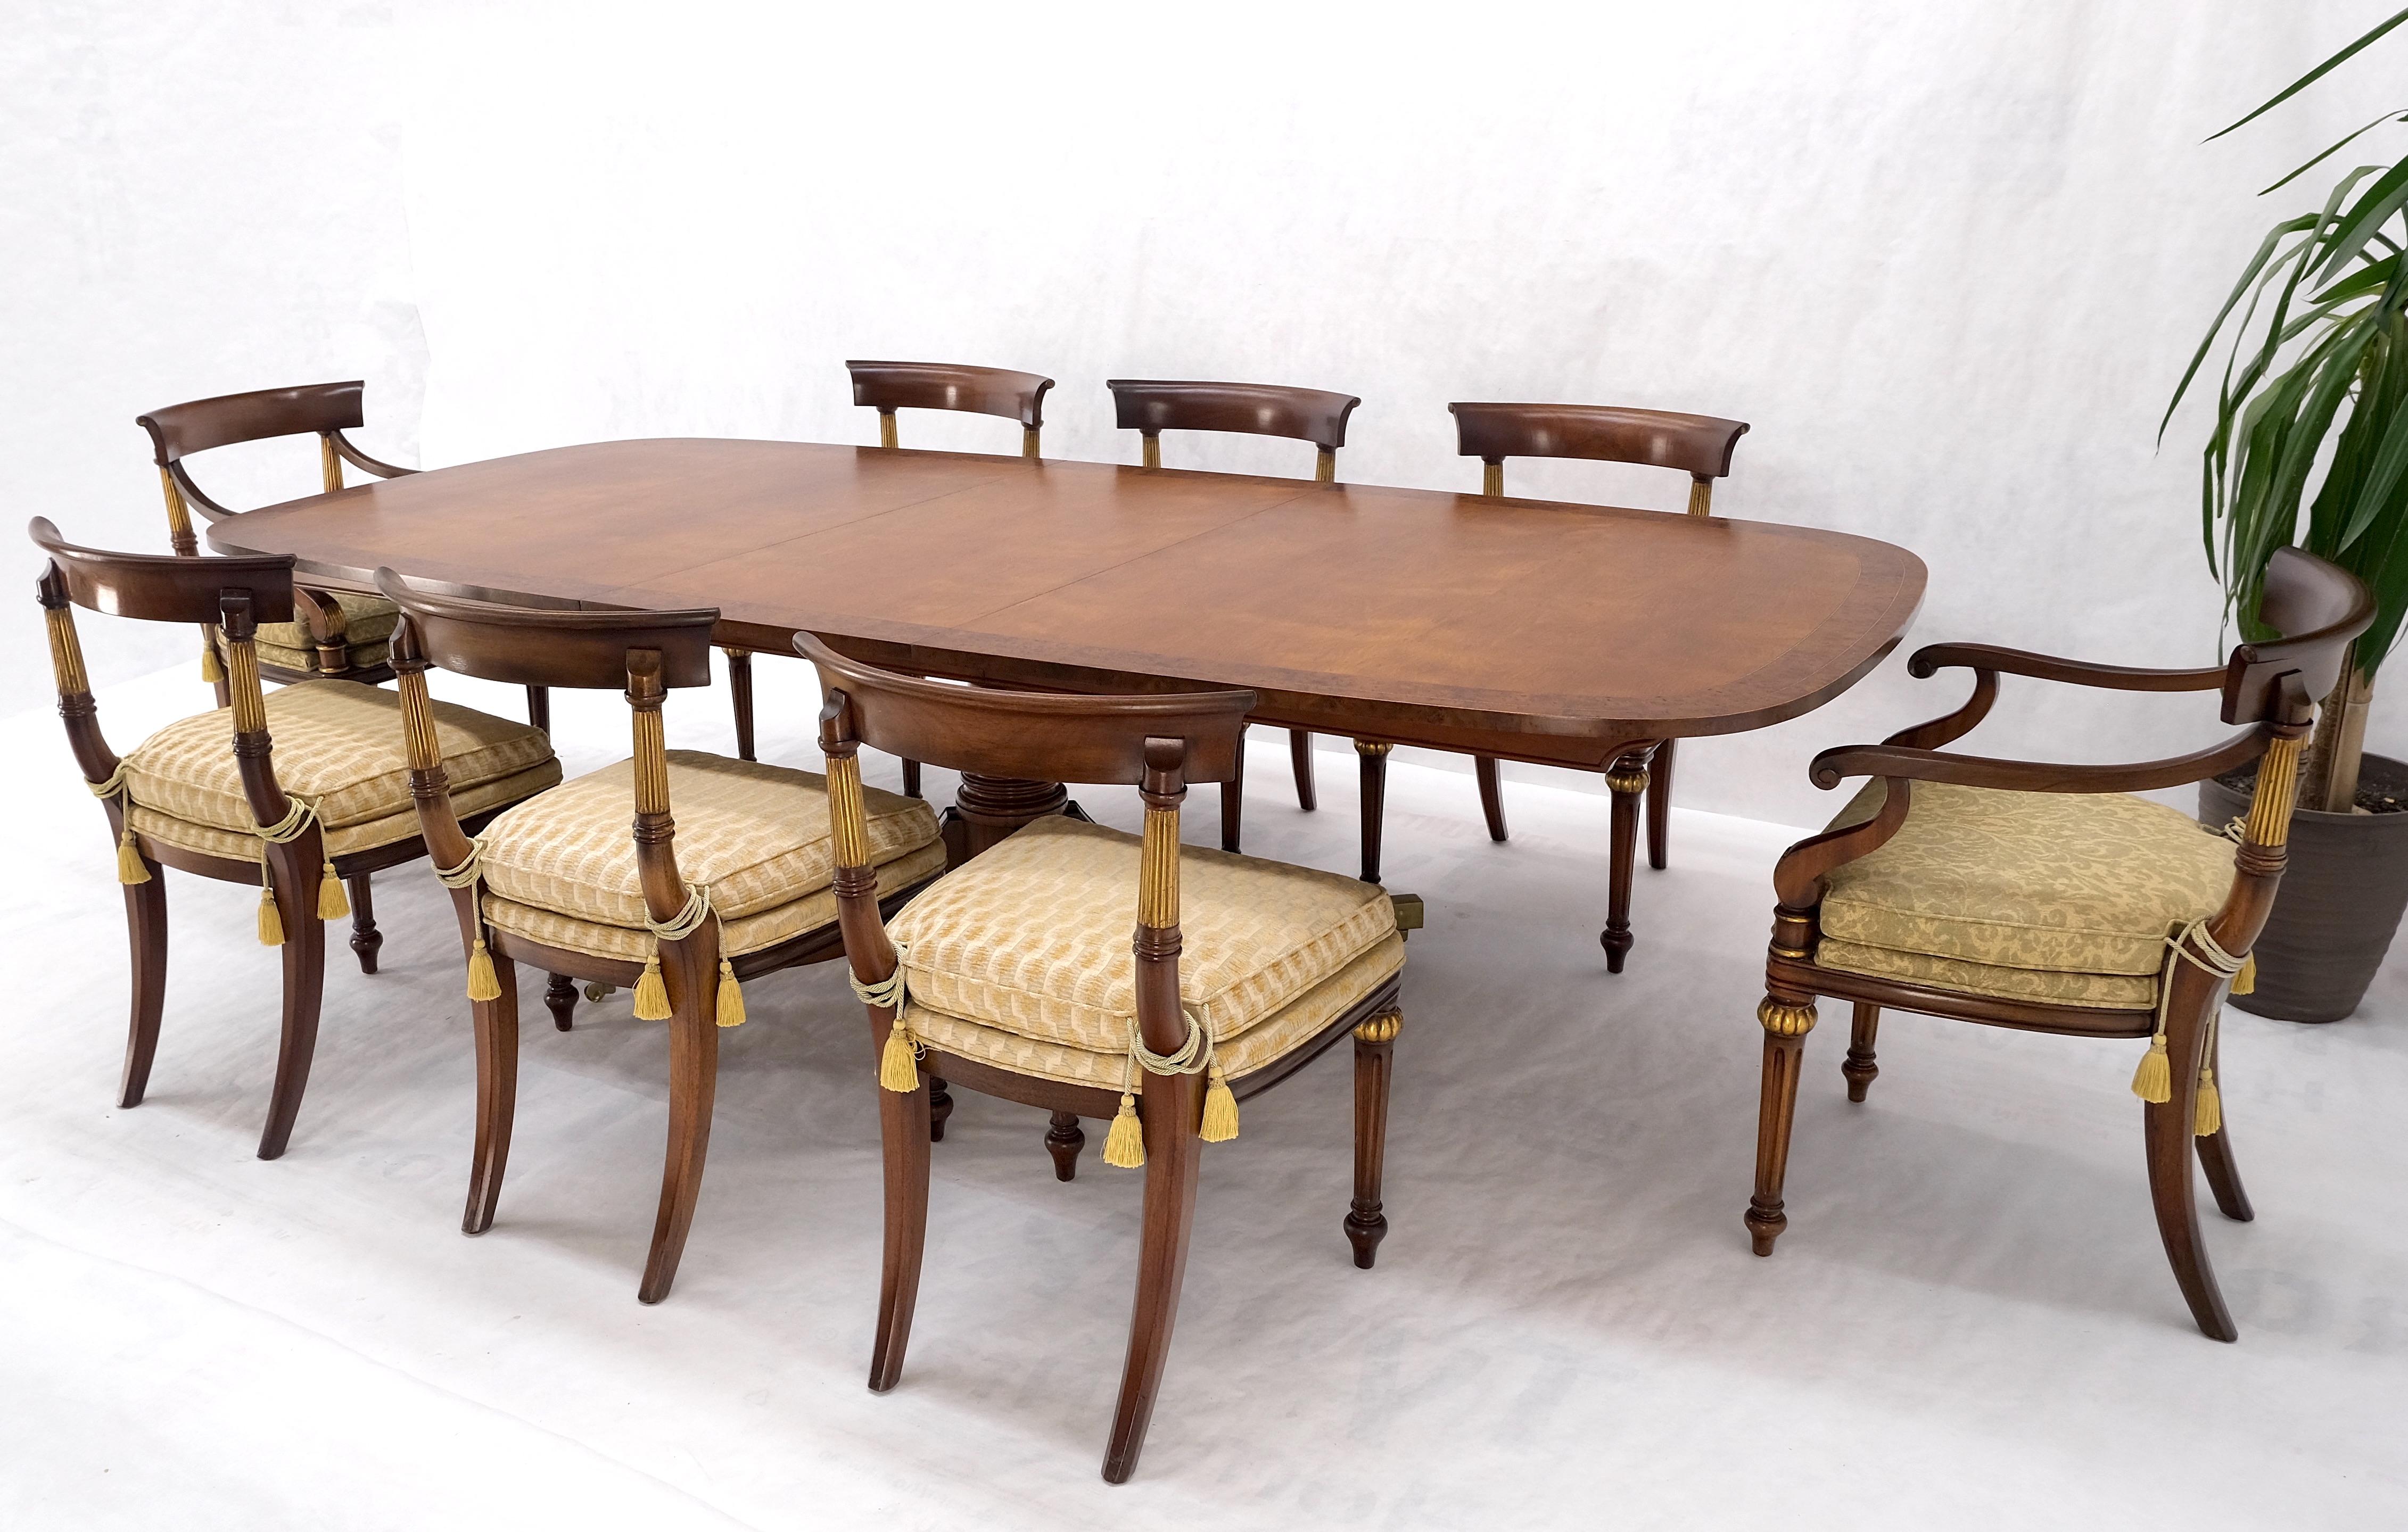 Single Pedestal One Leaf Oval Banded Dining Table 8 Regency Chairs Set MINT! For Sale 8